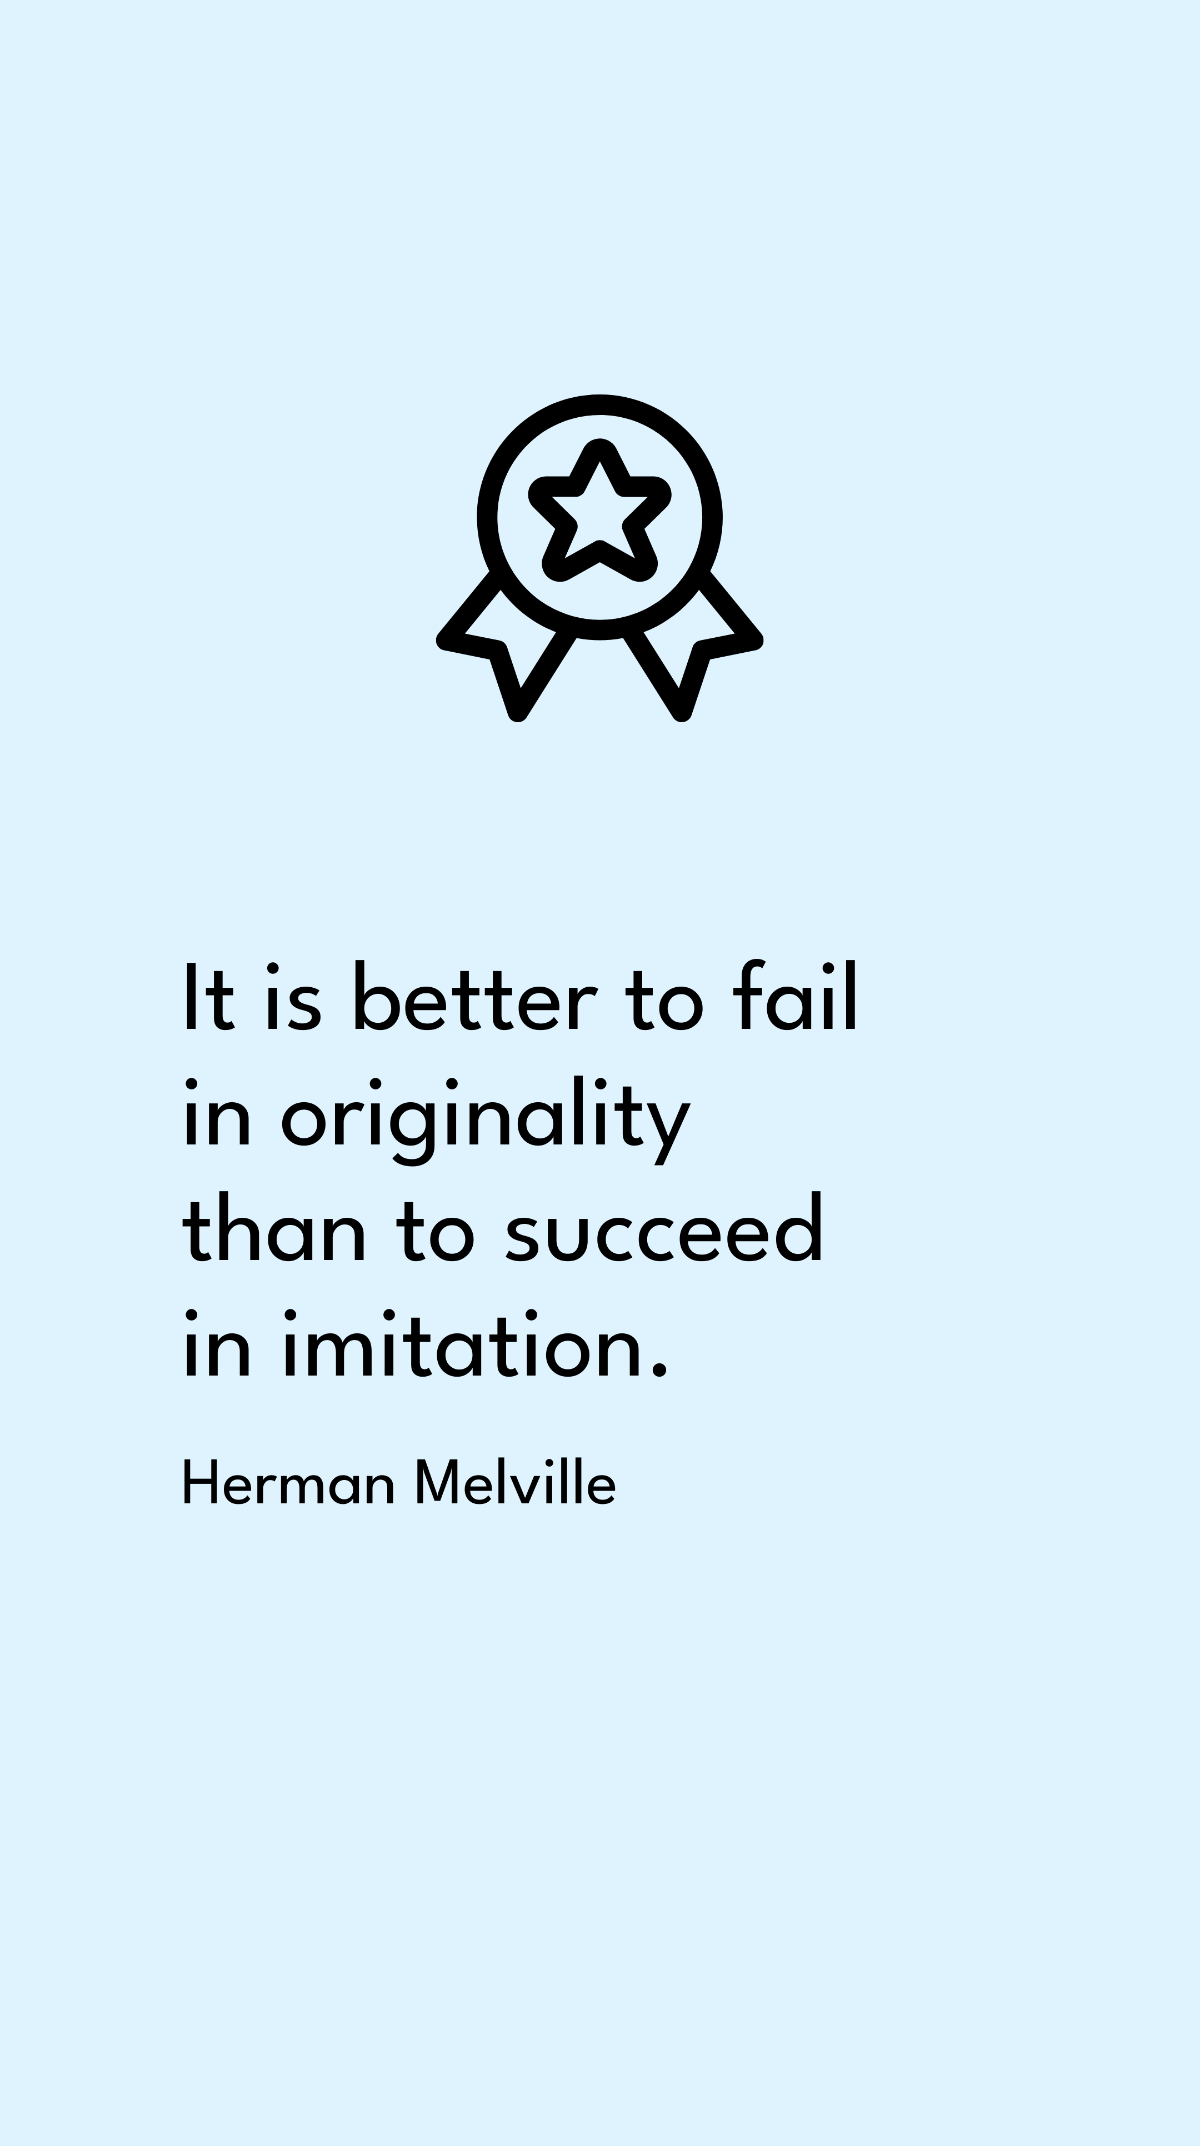 Herman Melville - It is better to fail in originality than to succeed in imitation.